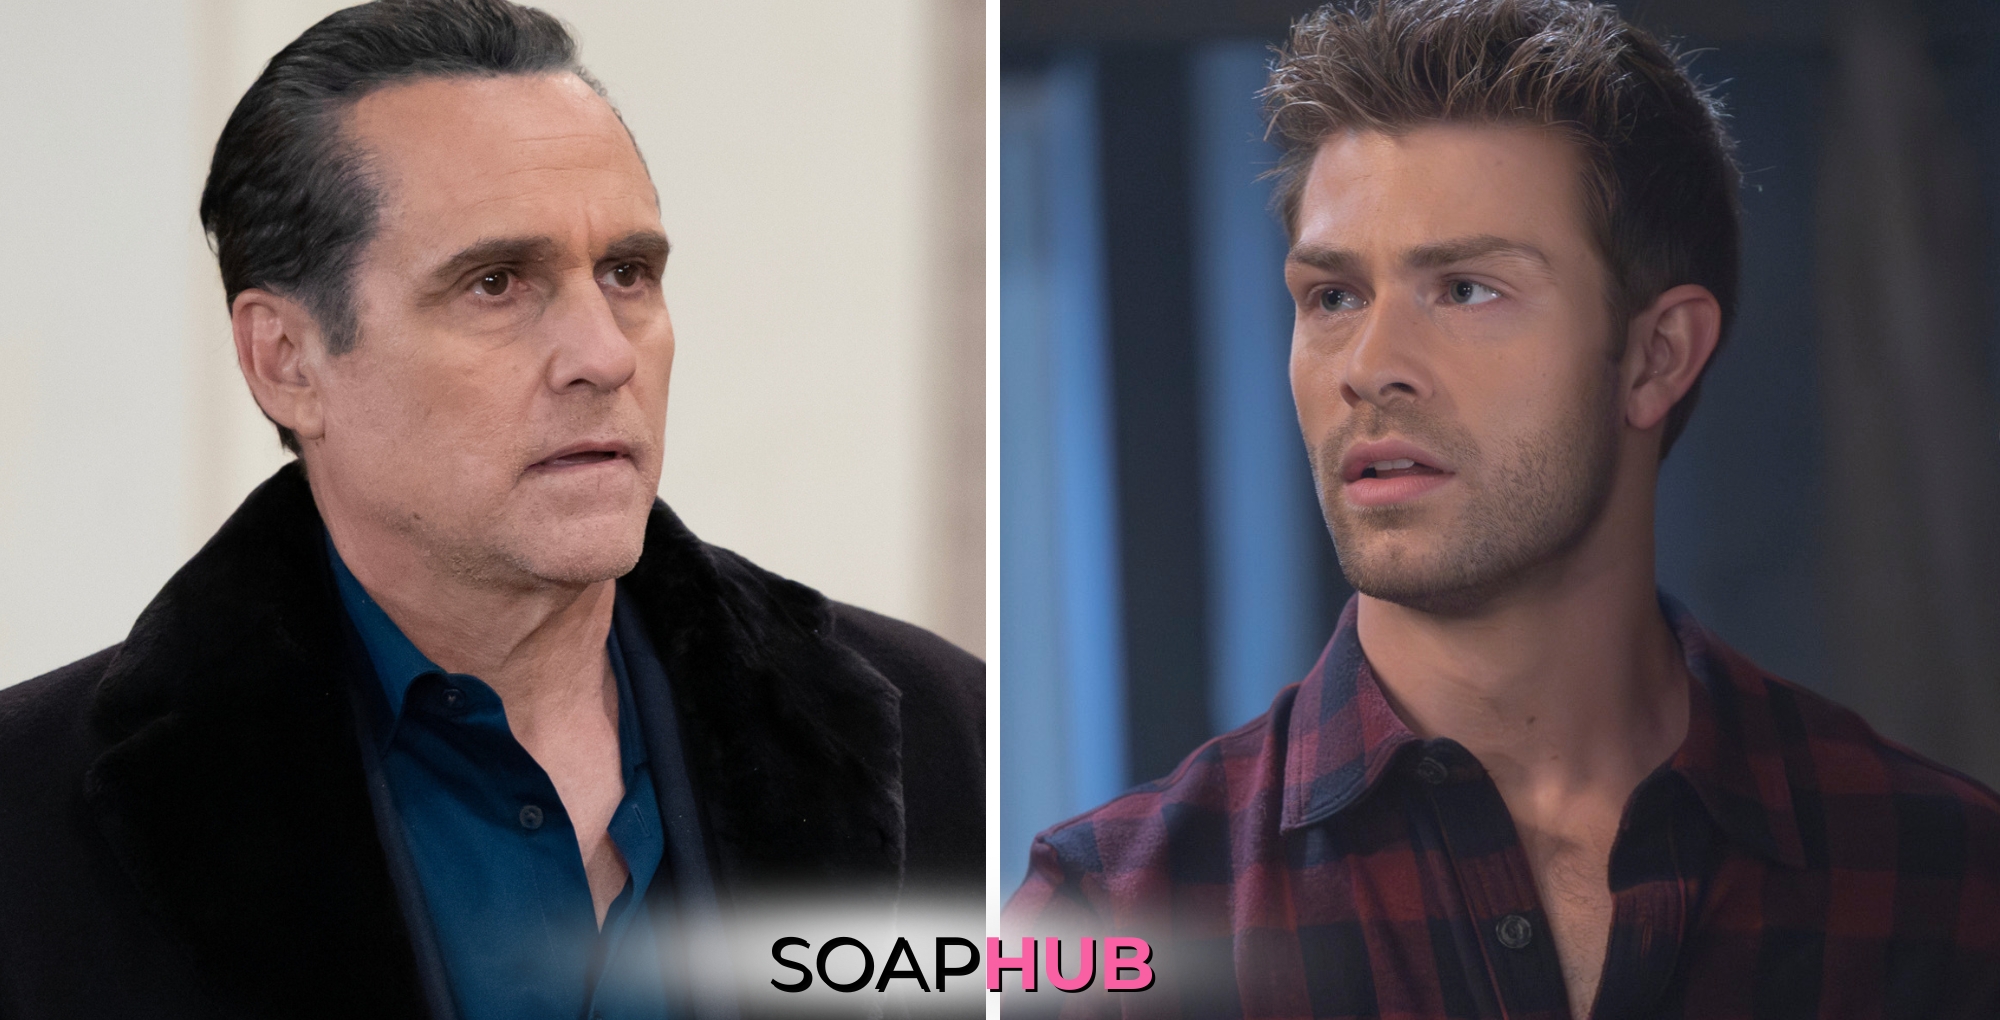 On General Hospital, April 18 spoilers focus on Sonny and Dex, with the Soap Hub logo across the bottom.